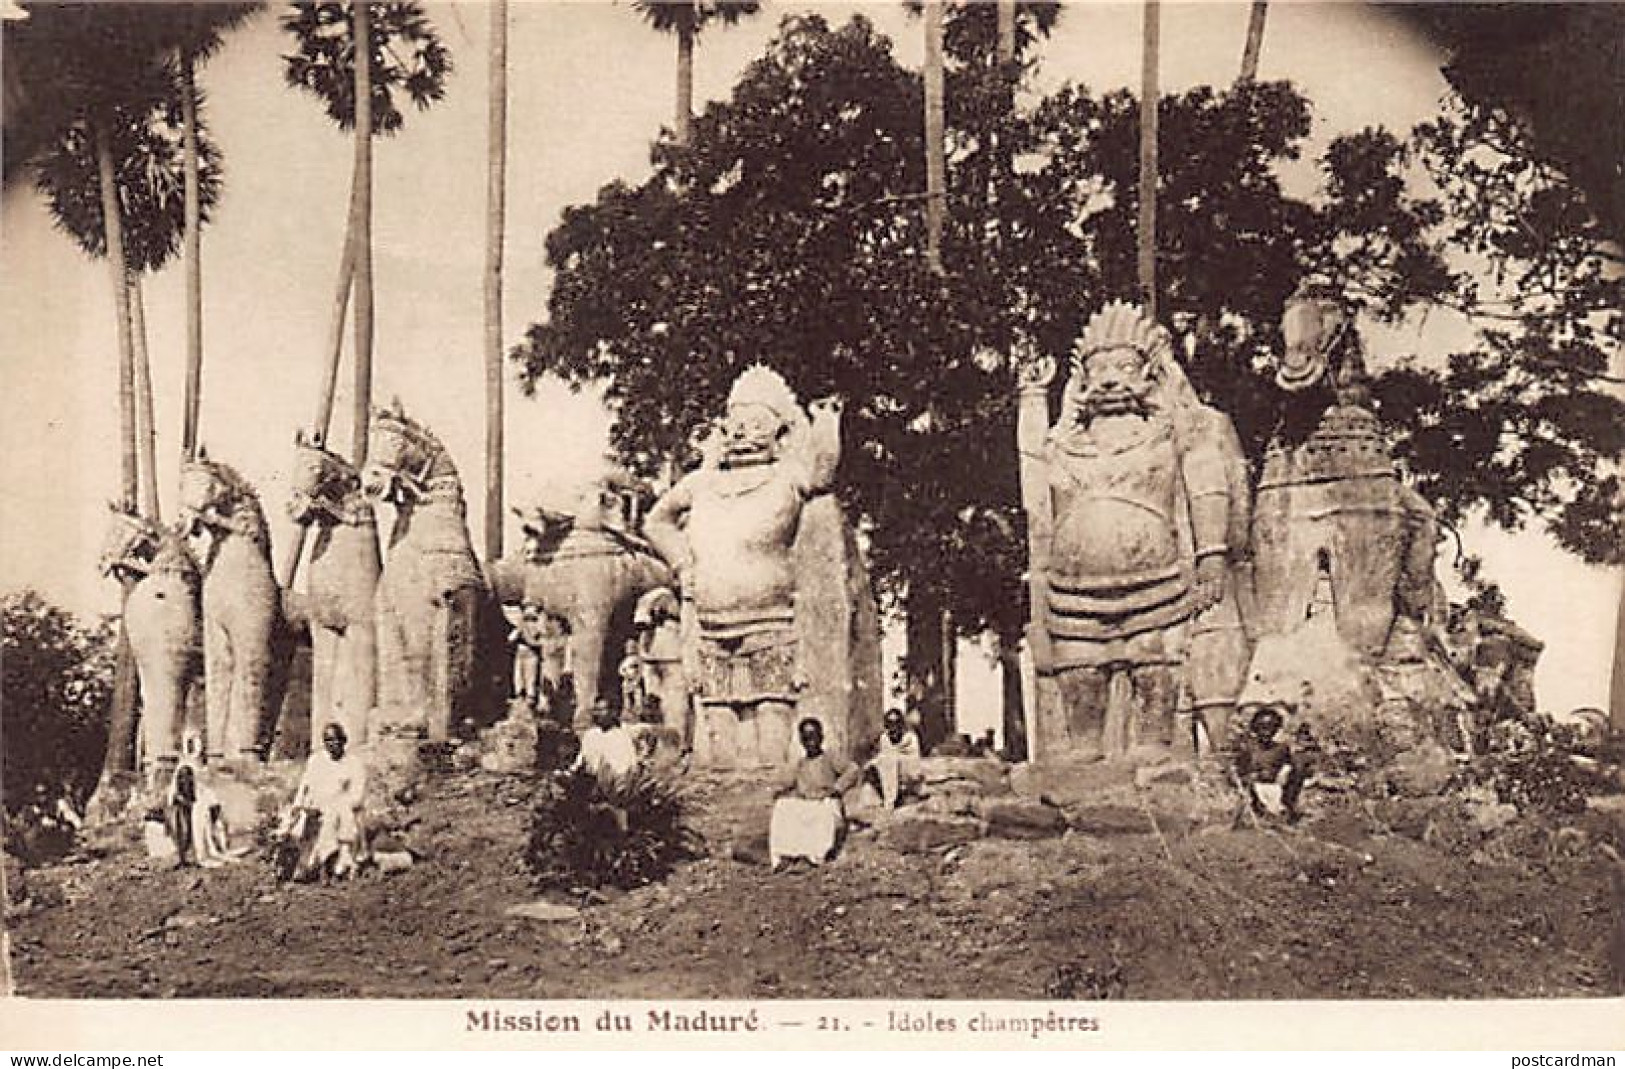 India - MADURAI - Indian Idols In The Countryside - Publ. Mission Jésuite Du Maduré - India